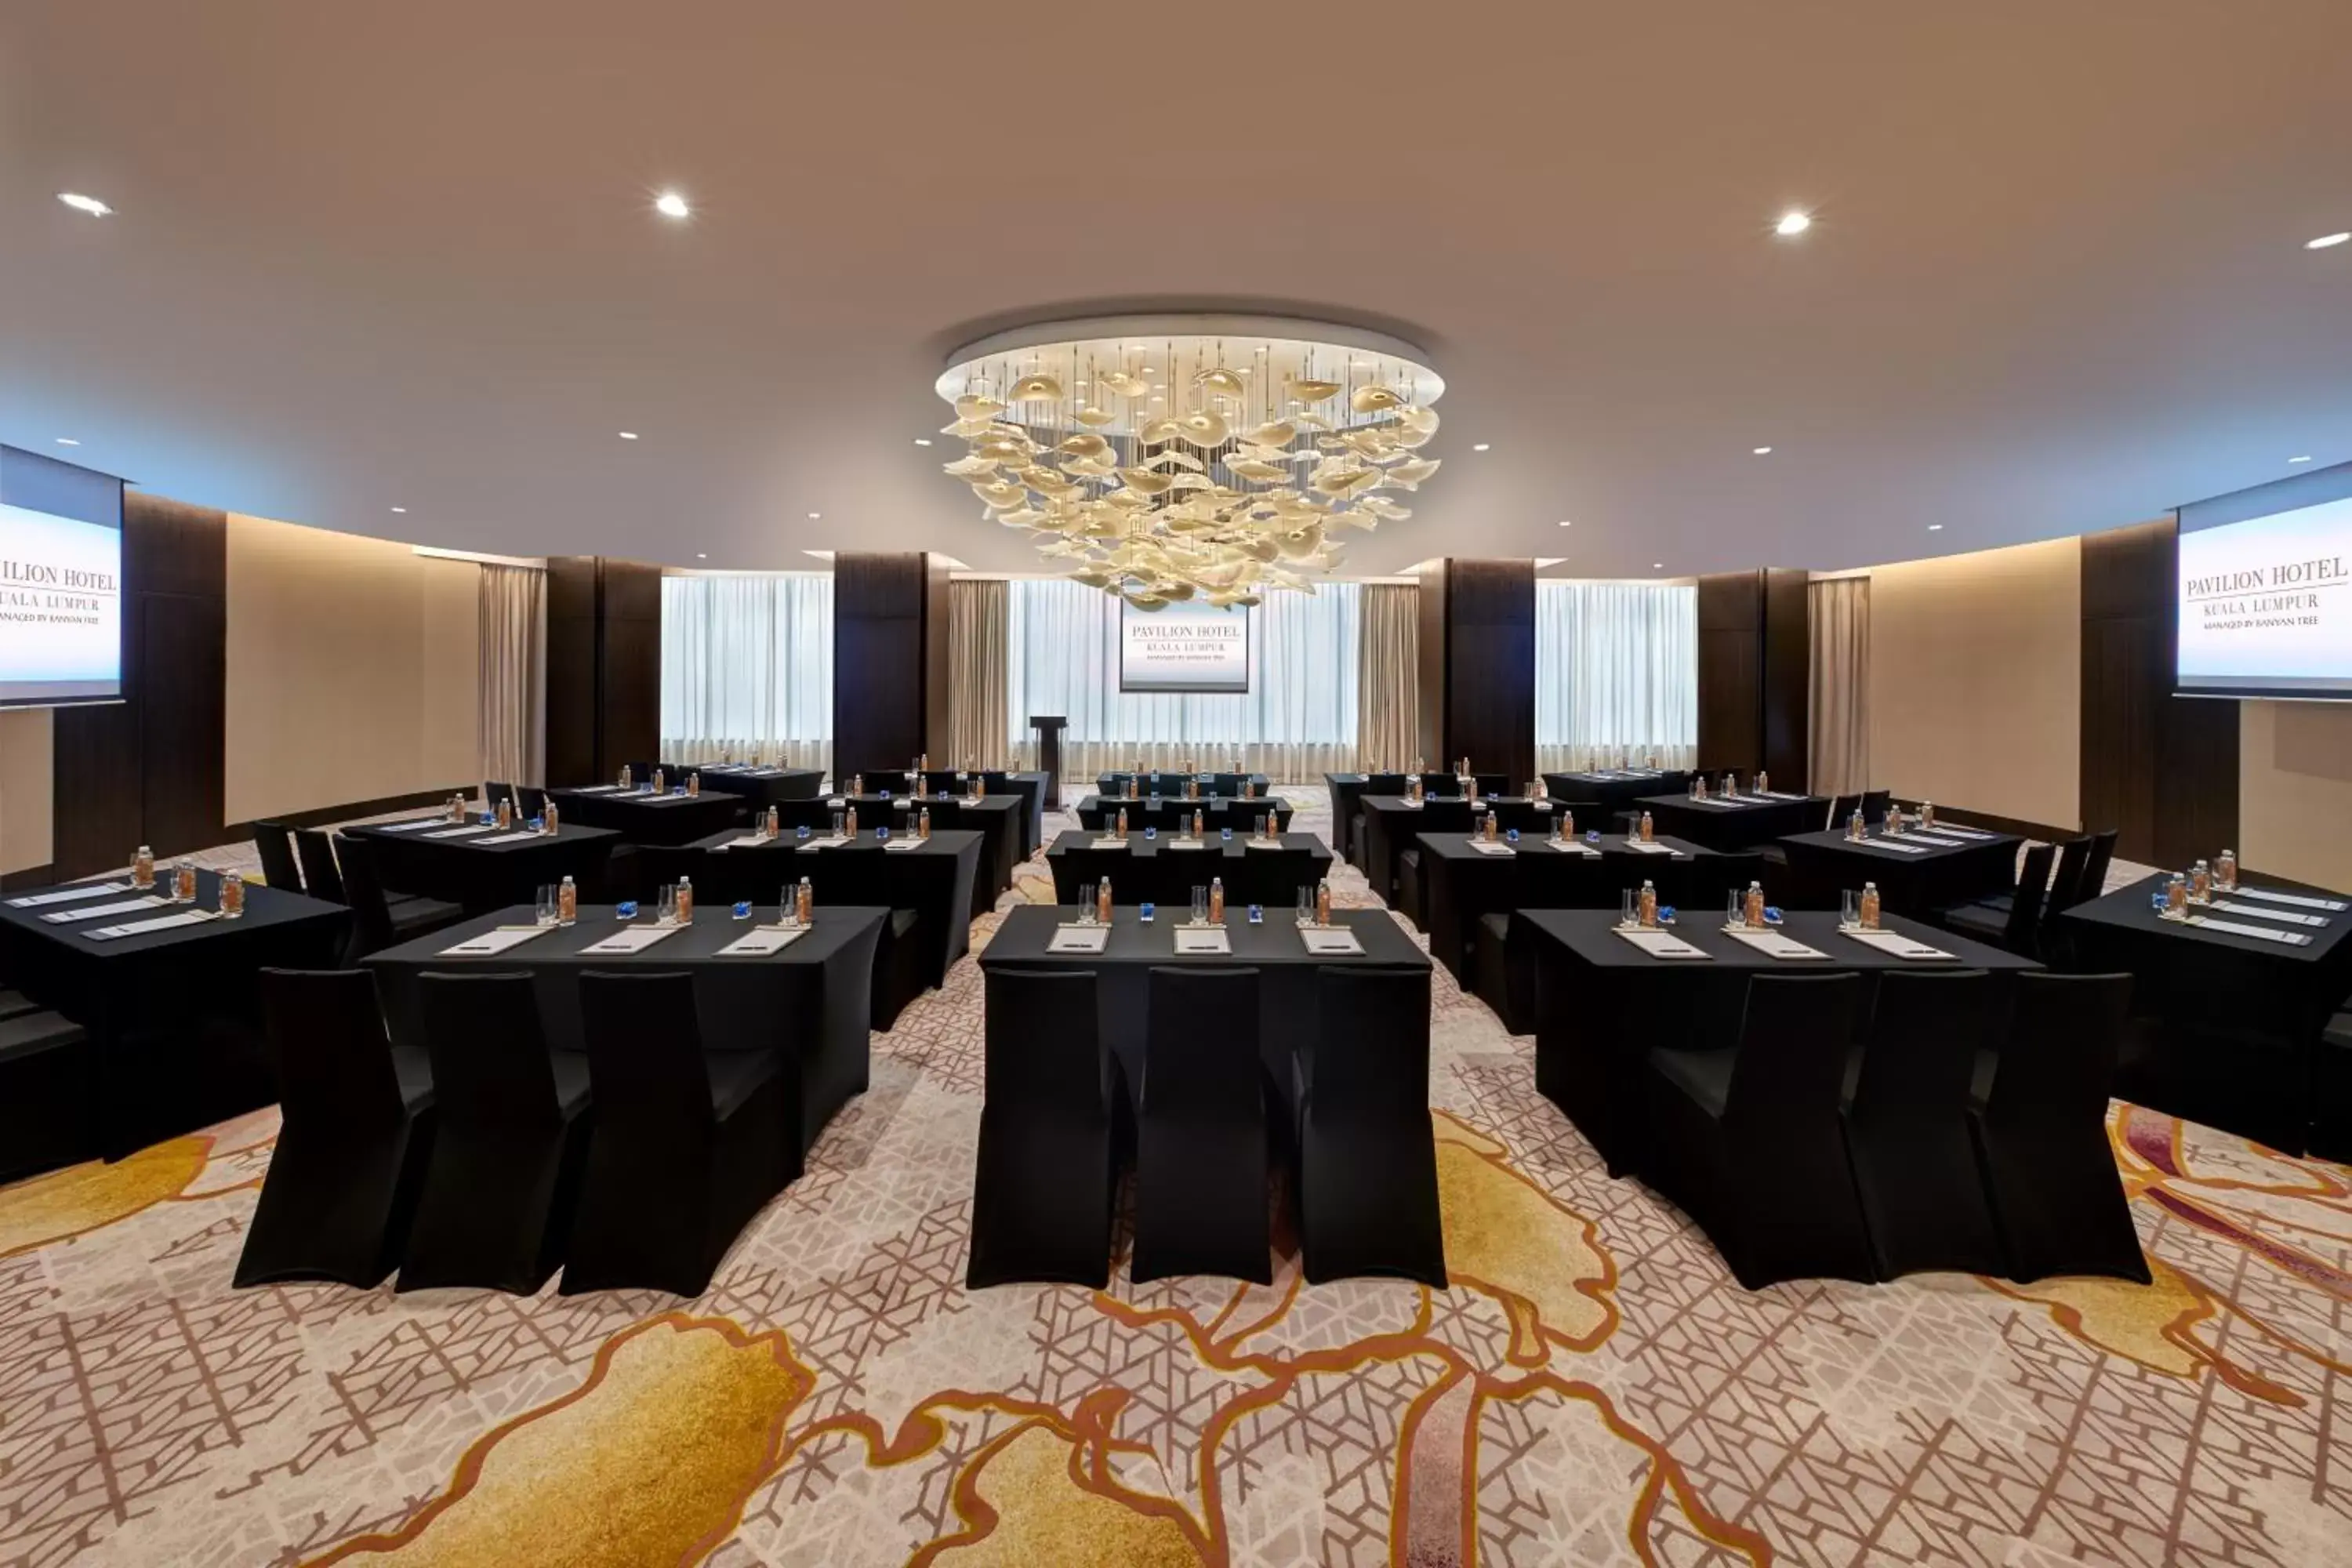 Meeting/conference room in Pavilion Hotel Kuala Lumpur Managed by Banyan Tree